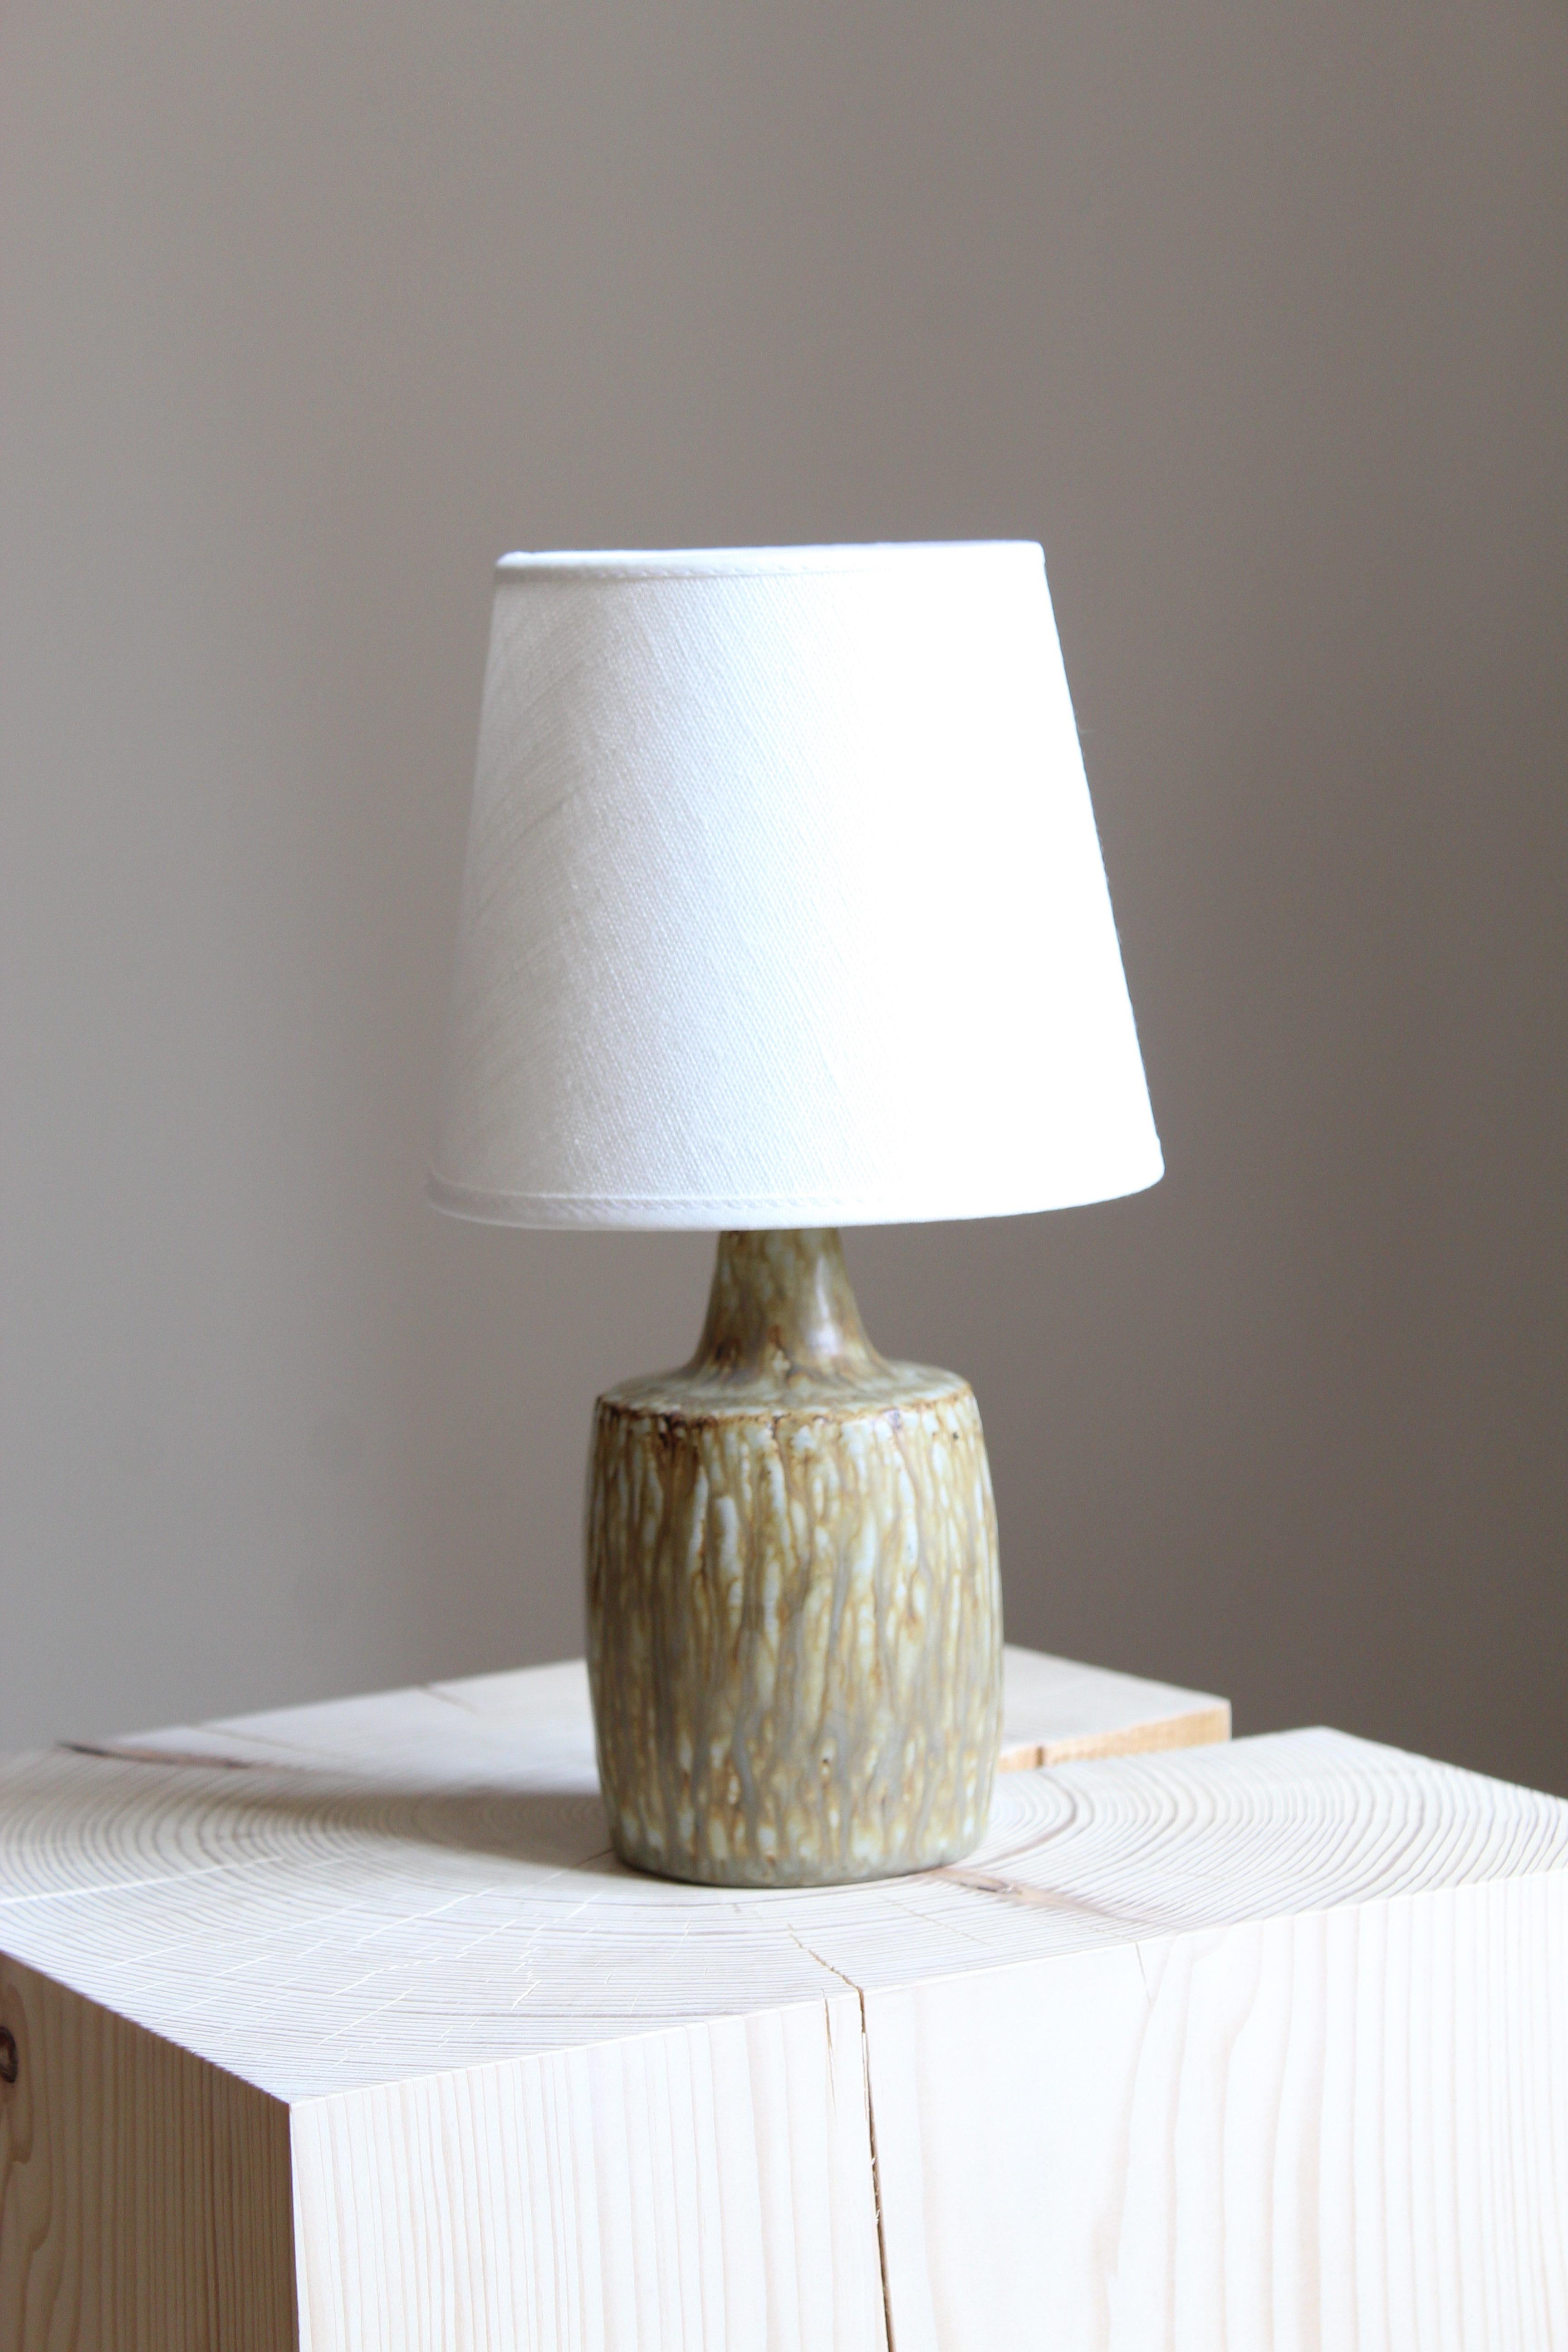 A table lamp produced by Rörstrand, Sweden, 1950s. Designed by Gunnar Nylund, (Swedish, 1914-1997). Signed. Sold without lampshade.

Nylund served as artistic director at Rörstrand, where he worked, 1931-1955. Prior to his work at Rörstrand he was a